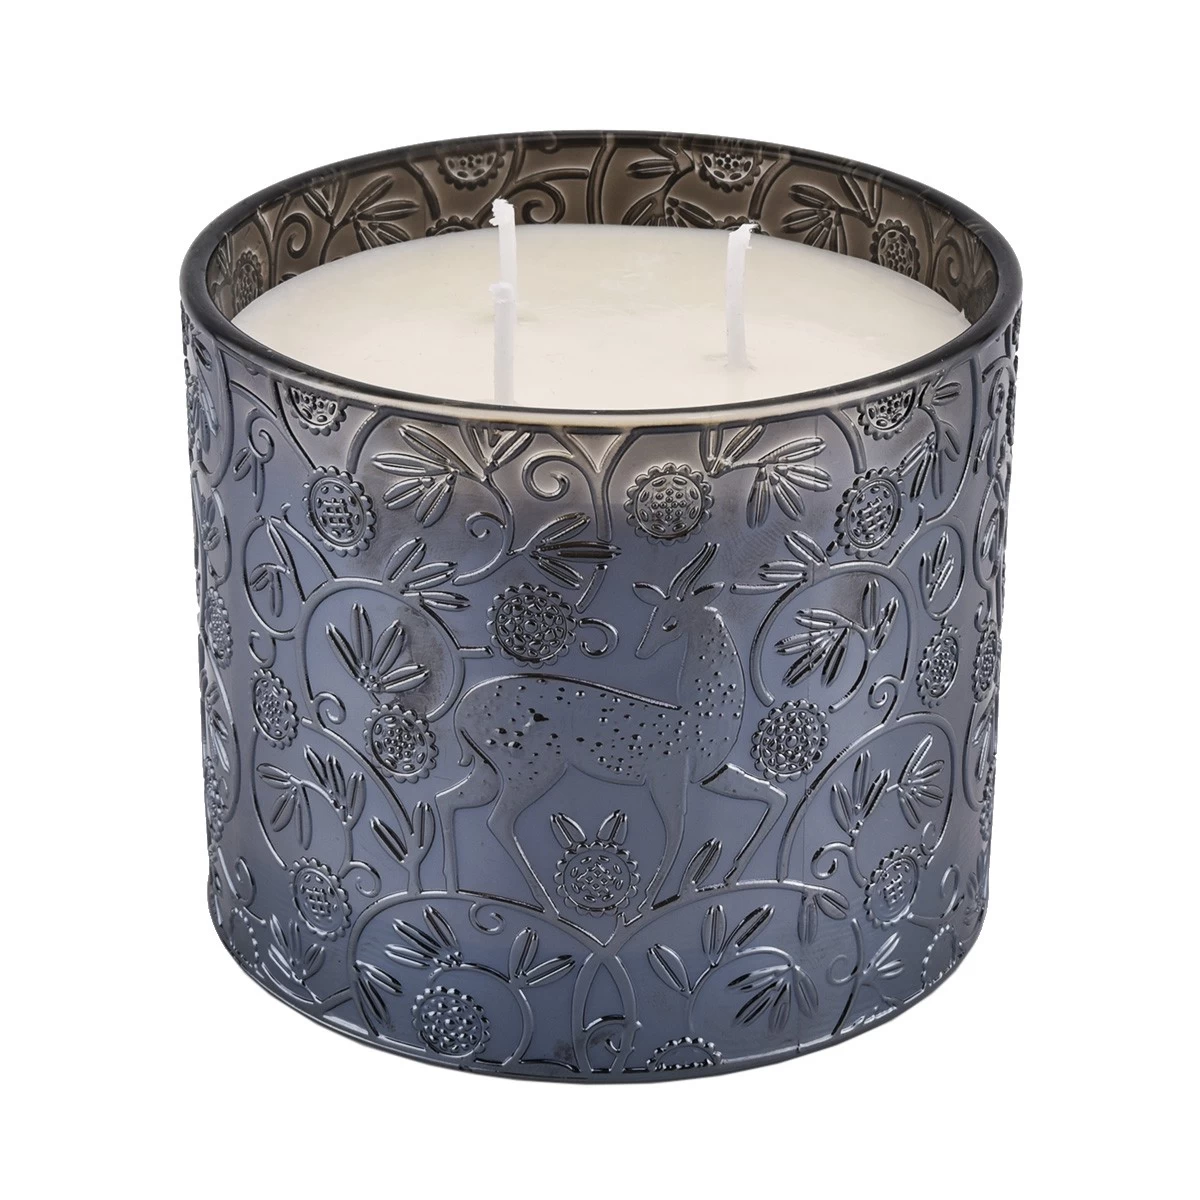 Wholesale black glass candle jars deer pattern candle jars for candle making